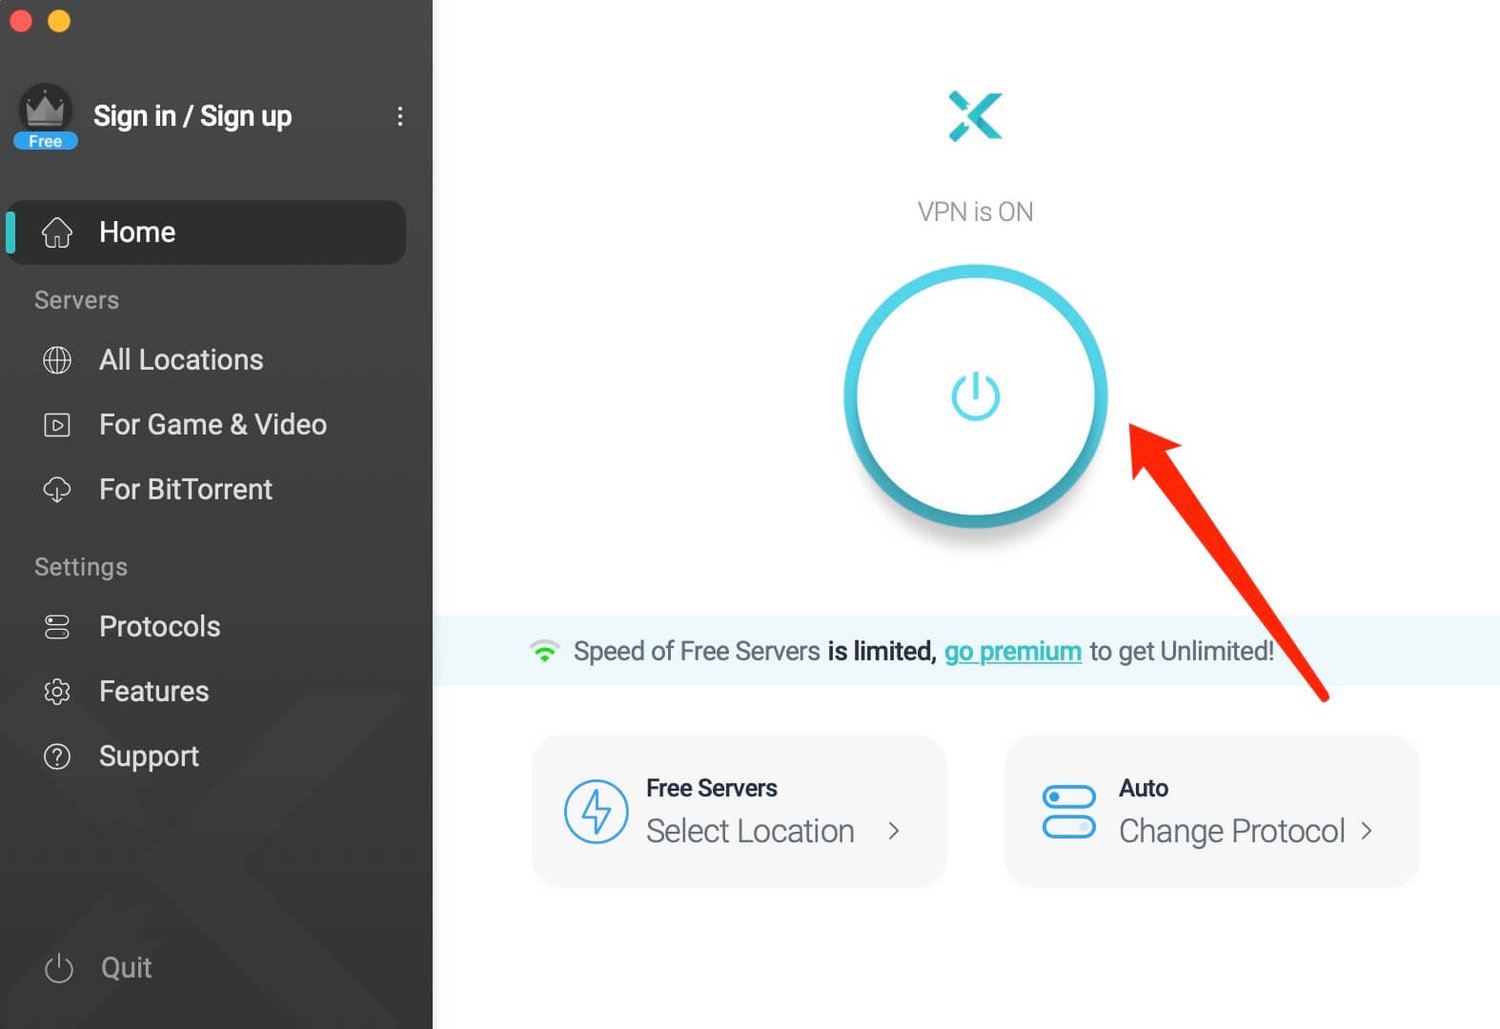 connect vpn and start surfing